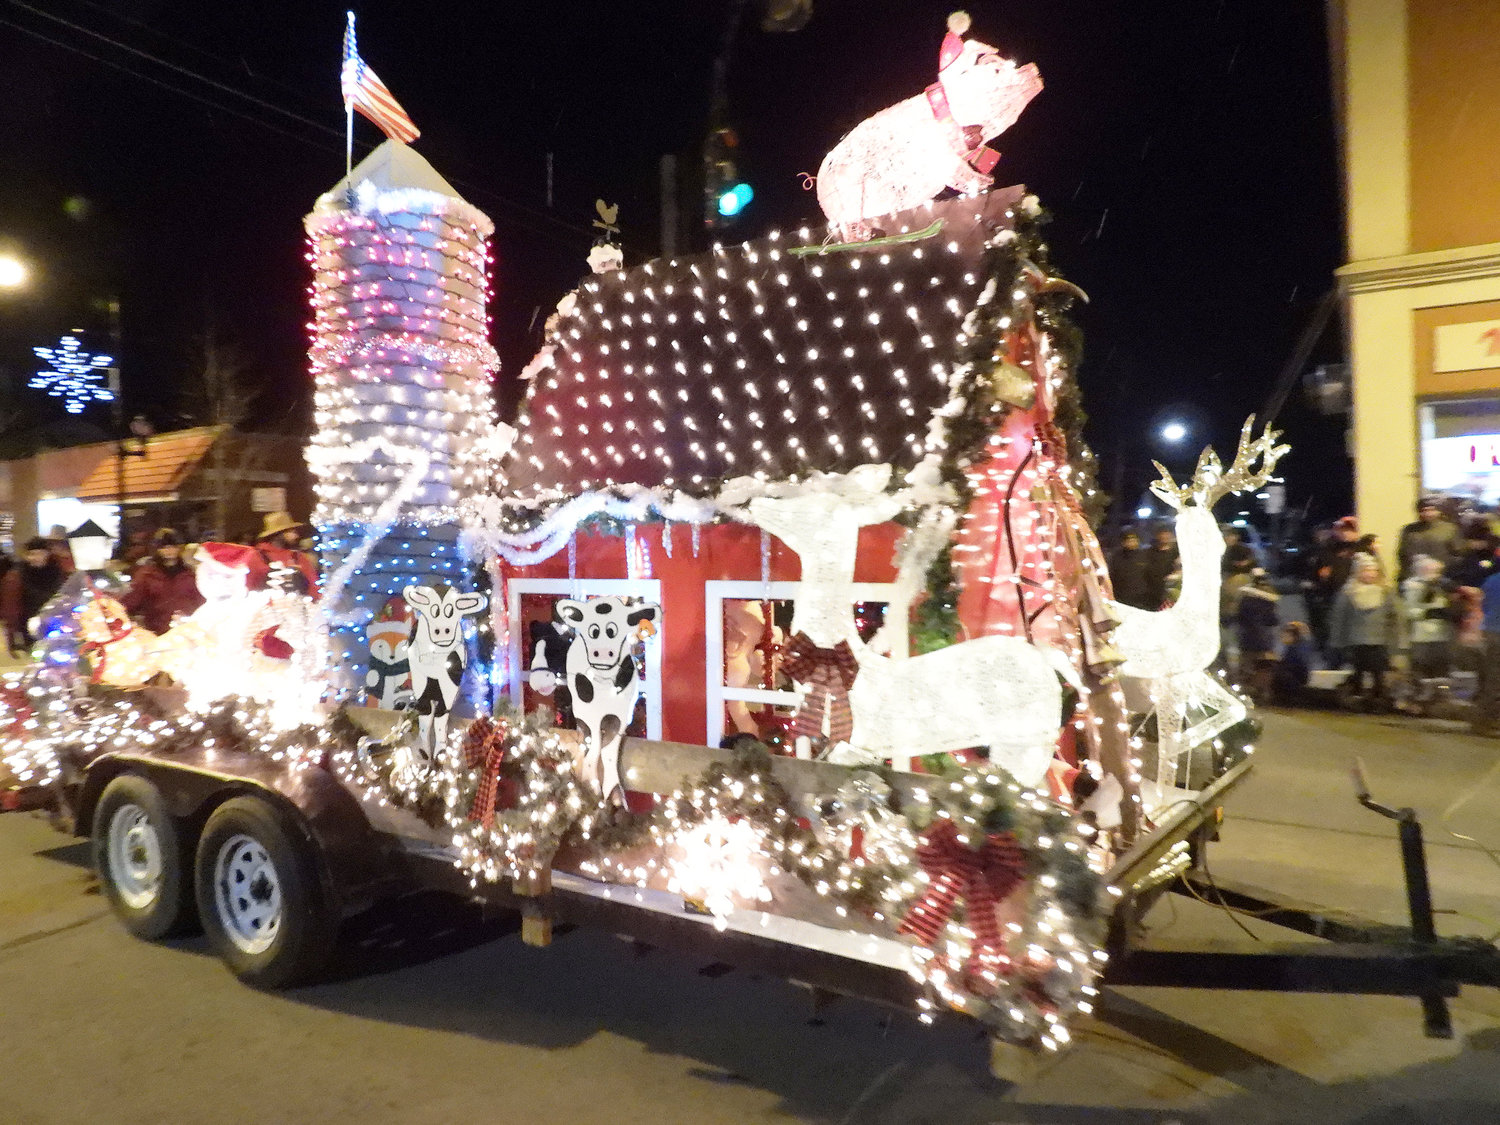 The 2021 Canastota Parade of Lights saw the streets filled with people coming together to ring in the holiday season.